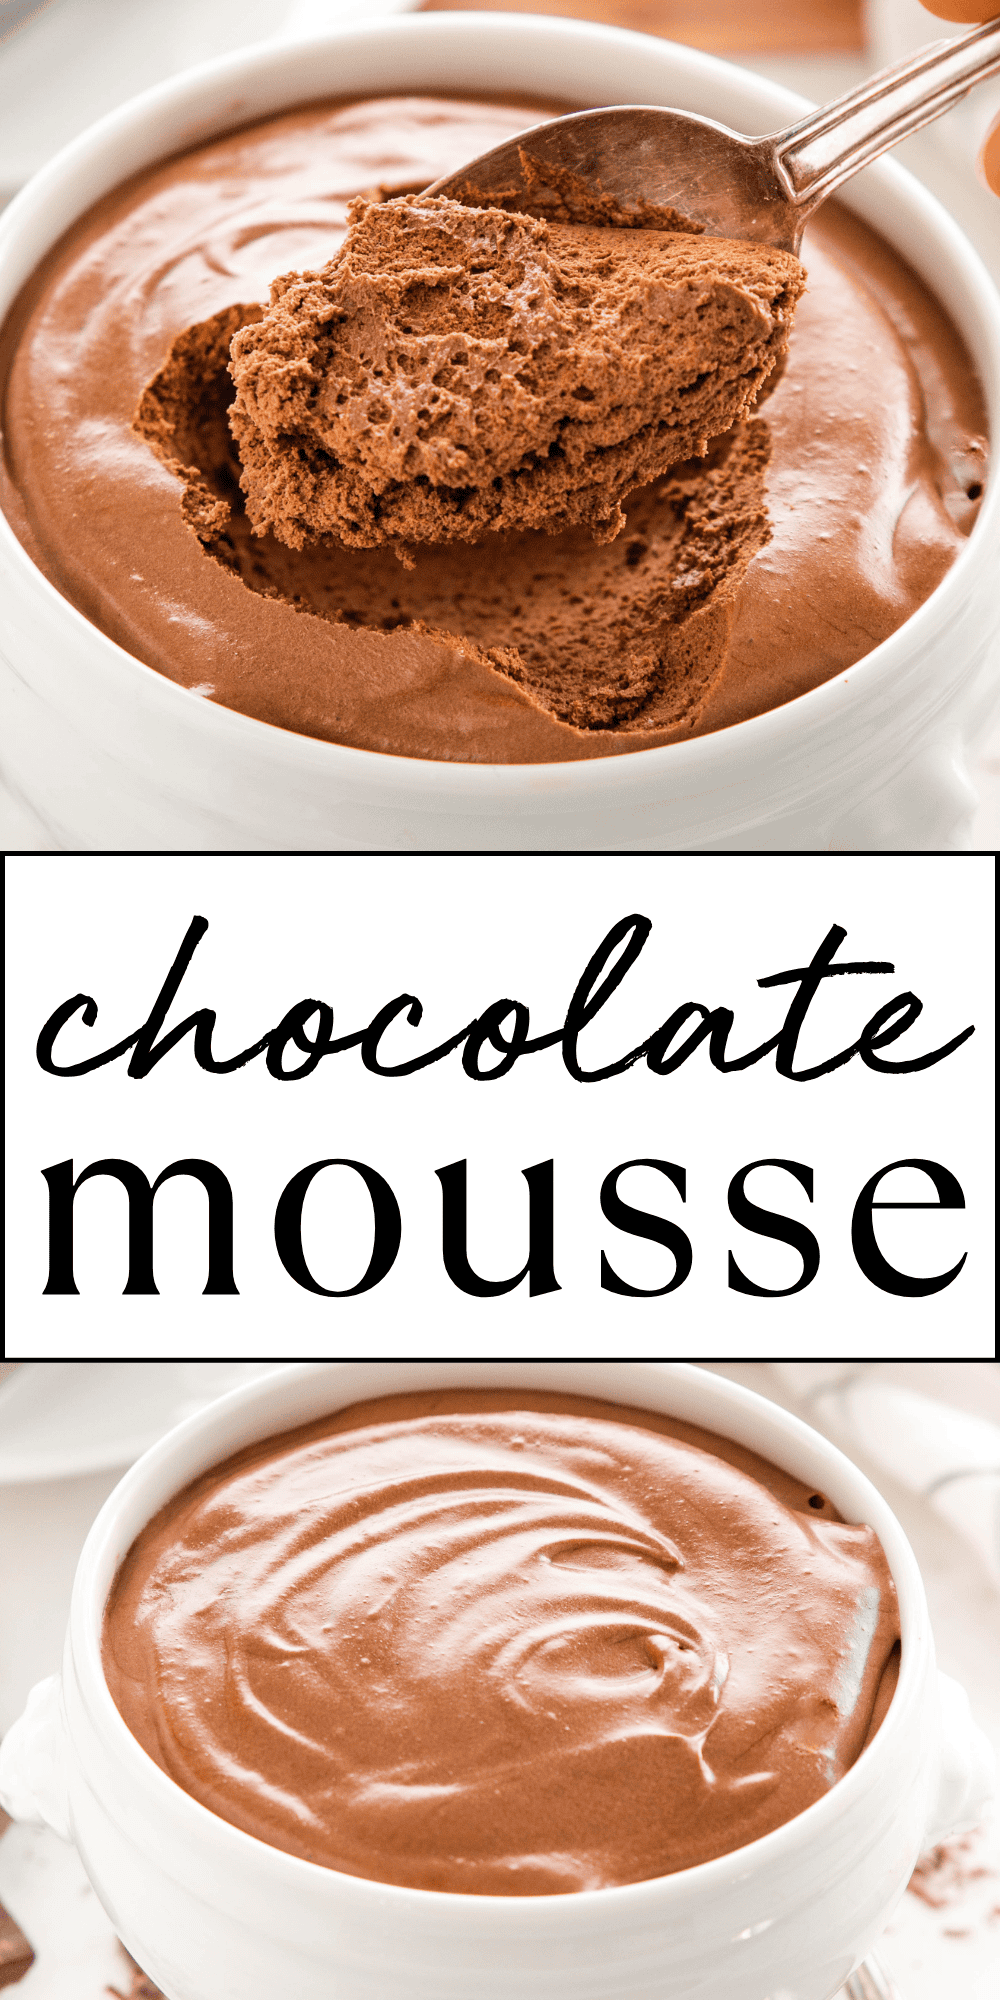 This Chocolate Mousse recipe is the BEST authentic French Mousse au Chocolat made with only 4 simple ingredients. A light & fluffy decadent dessert that's easy to make and ready in minutes. Recipe from thebusybaker.ca! #chocolatemousse #easychocolatemousse #chocolatemousserecipe #mousseauchocolat #chocolatemousserecipes #frenchcooking #frenchdessert #parisdessert #paris #easychocolatedessert #chocolaterecipe #mousserecipe via @busybakerblog